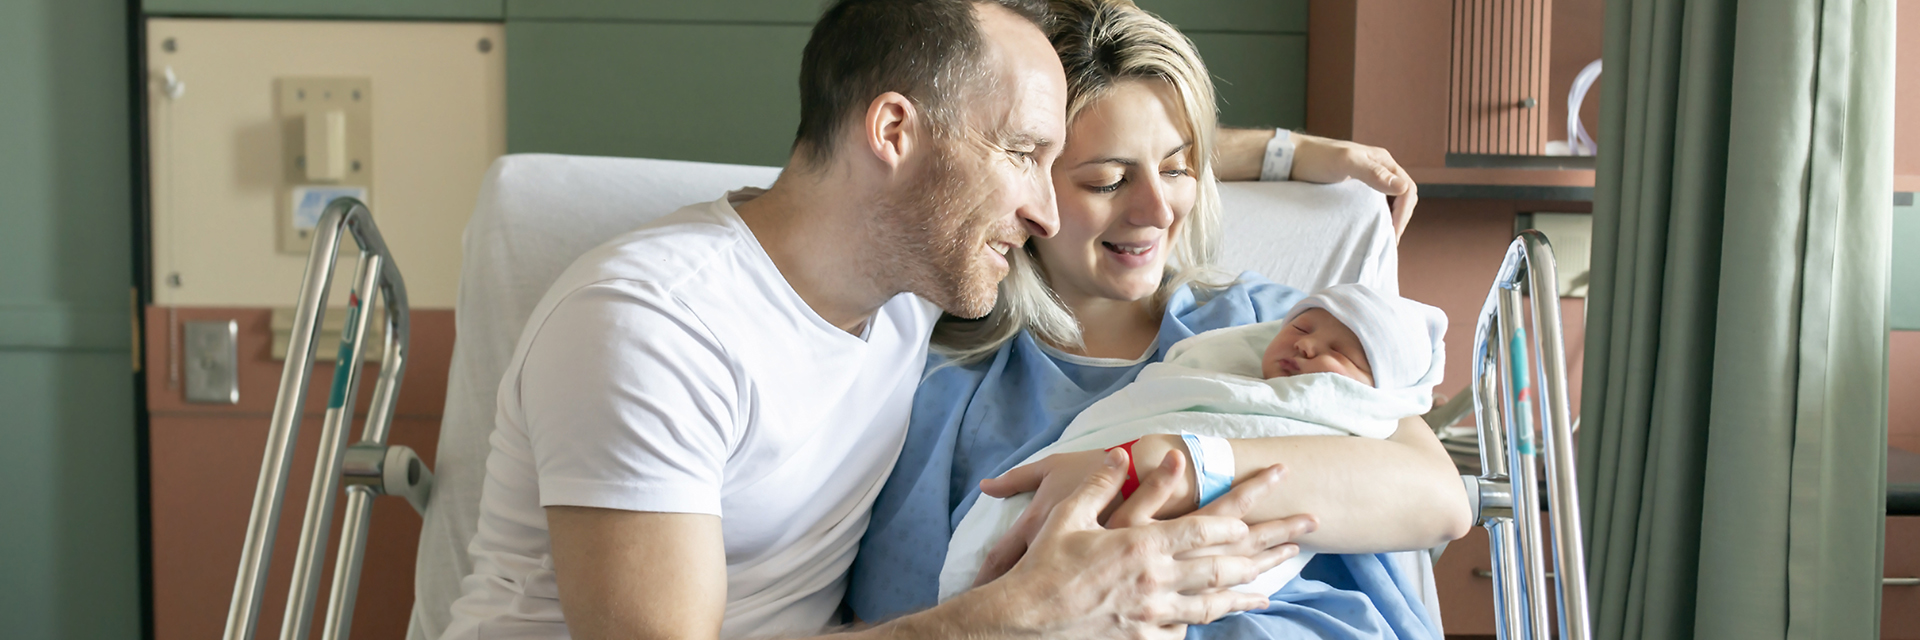 Man and woman in hospital bed with new baby